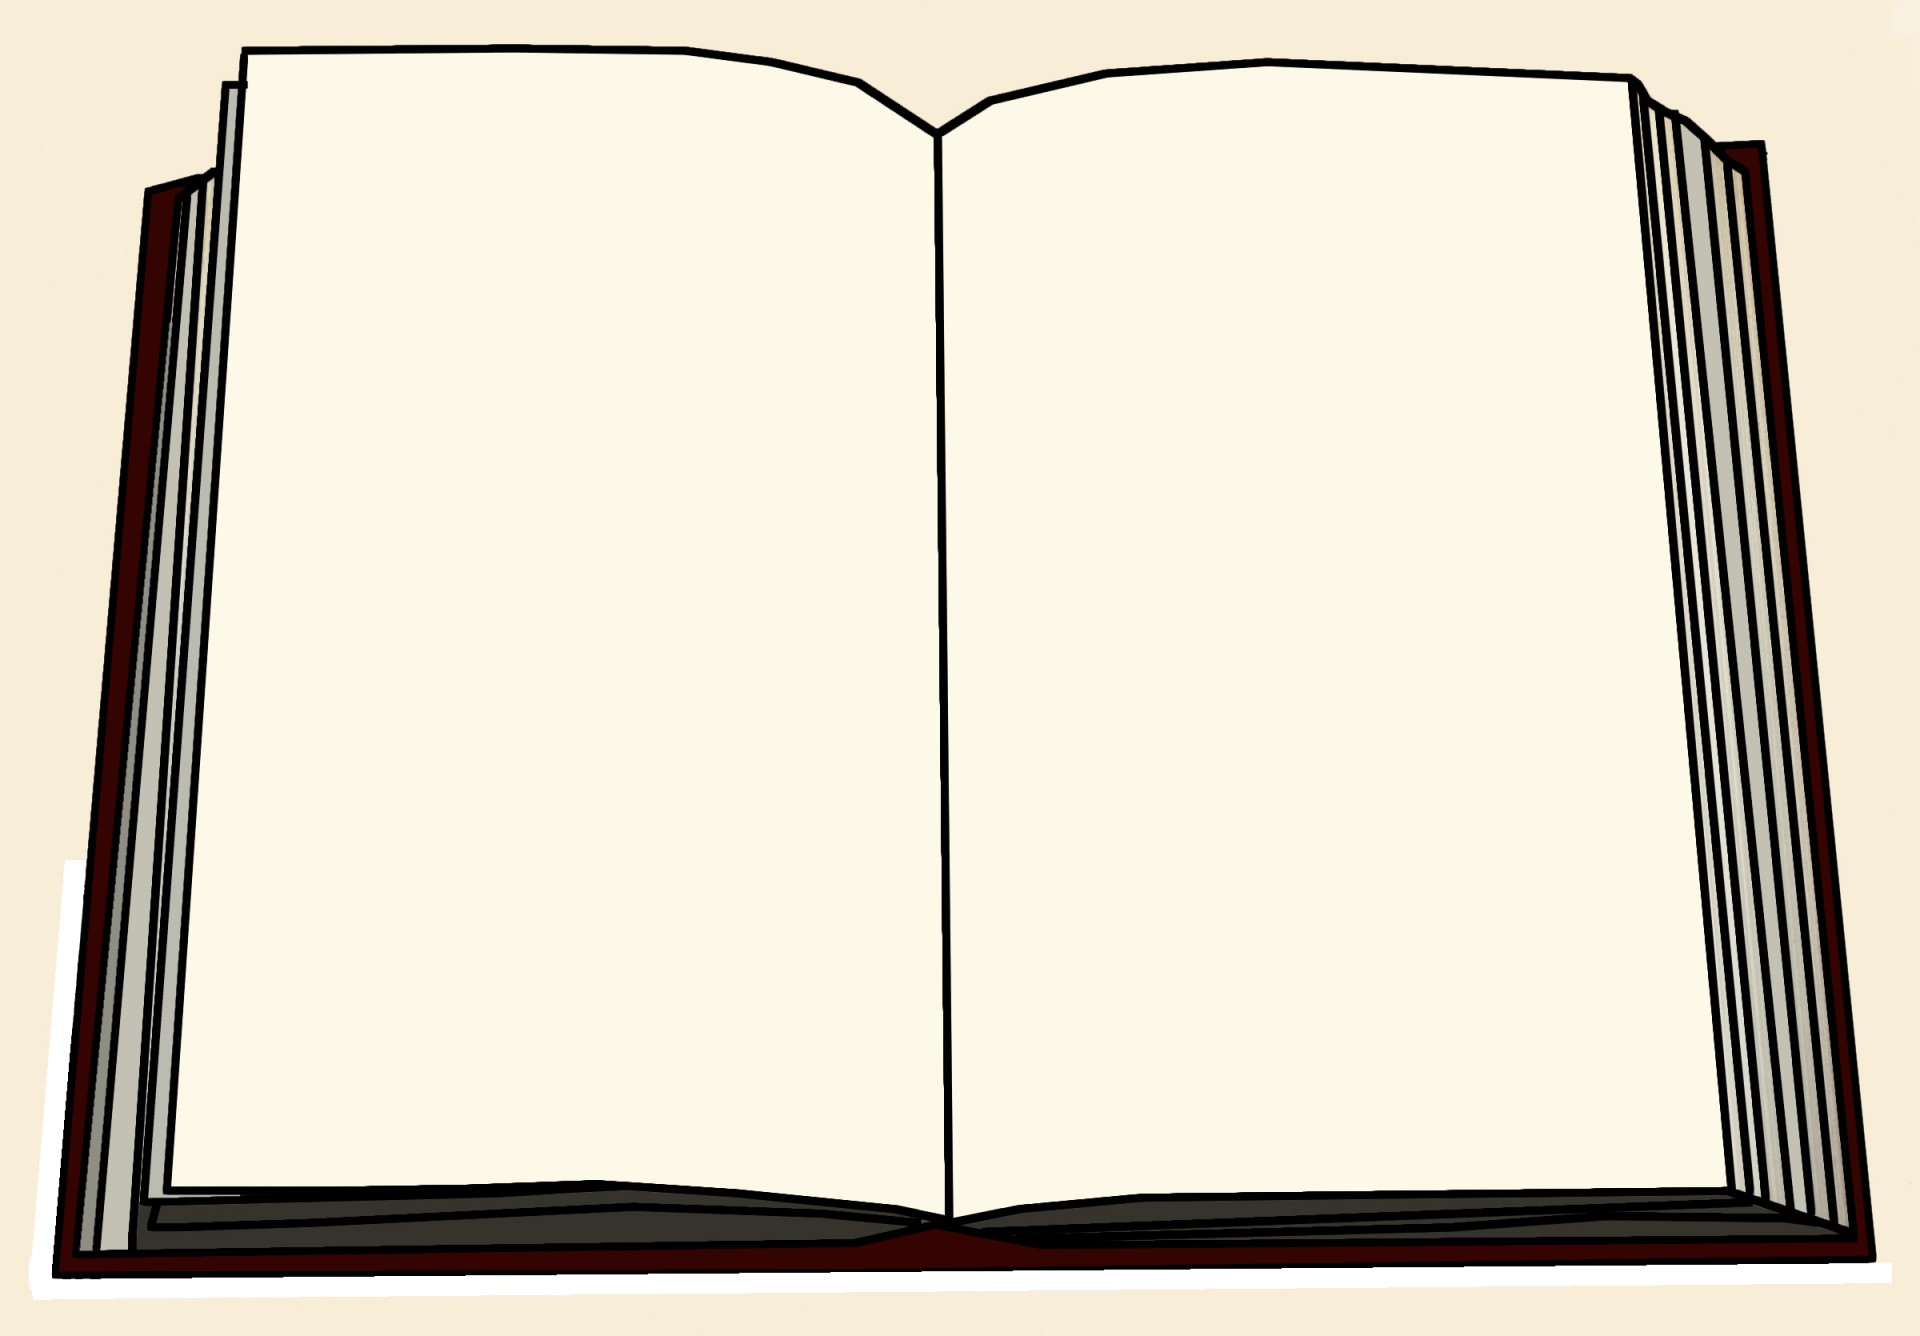 blank book cover clipart - photo #4